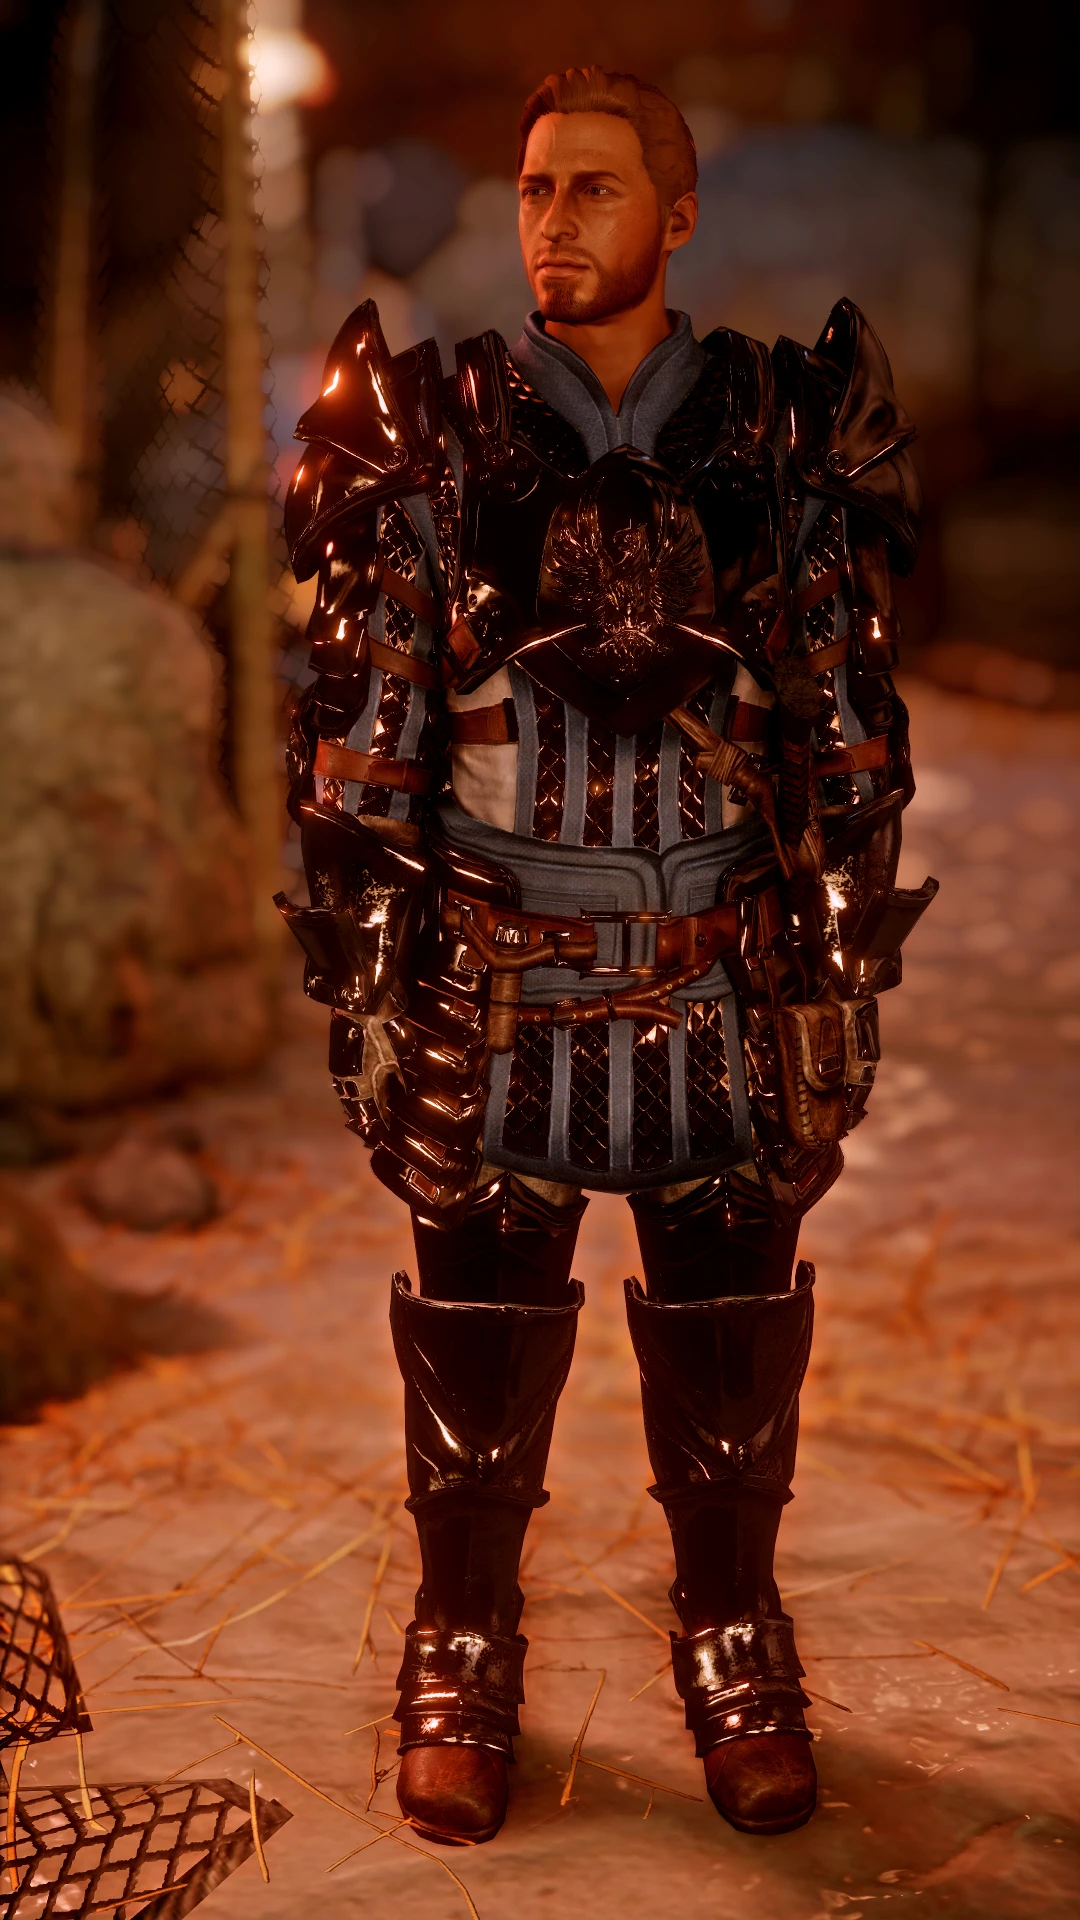 dragon age inquisition armor with slots